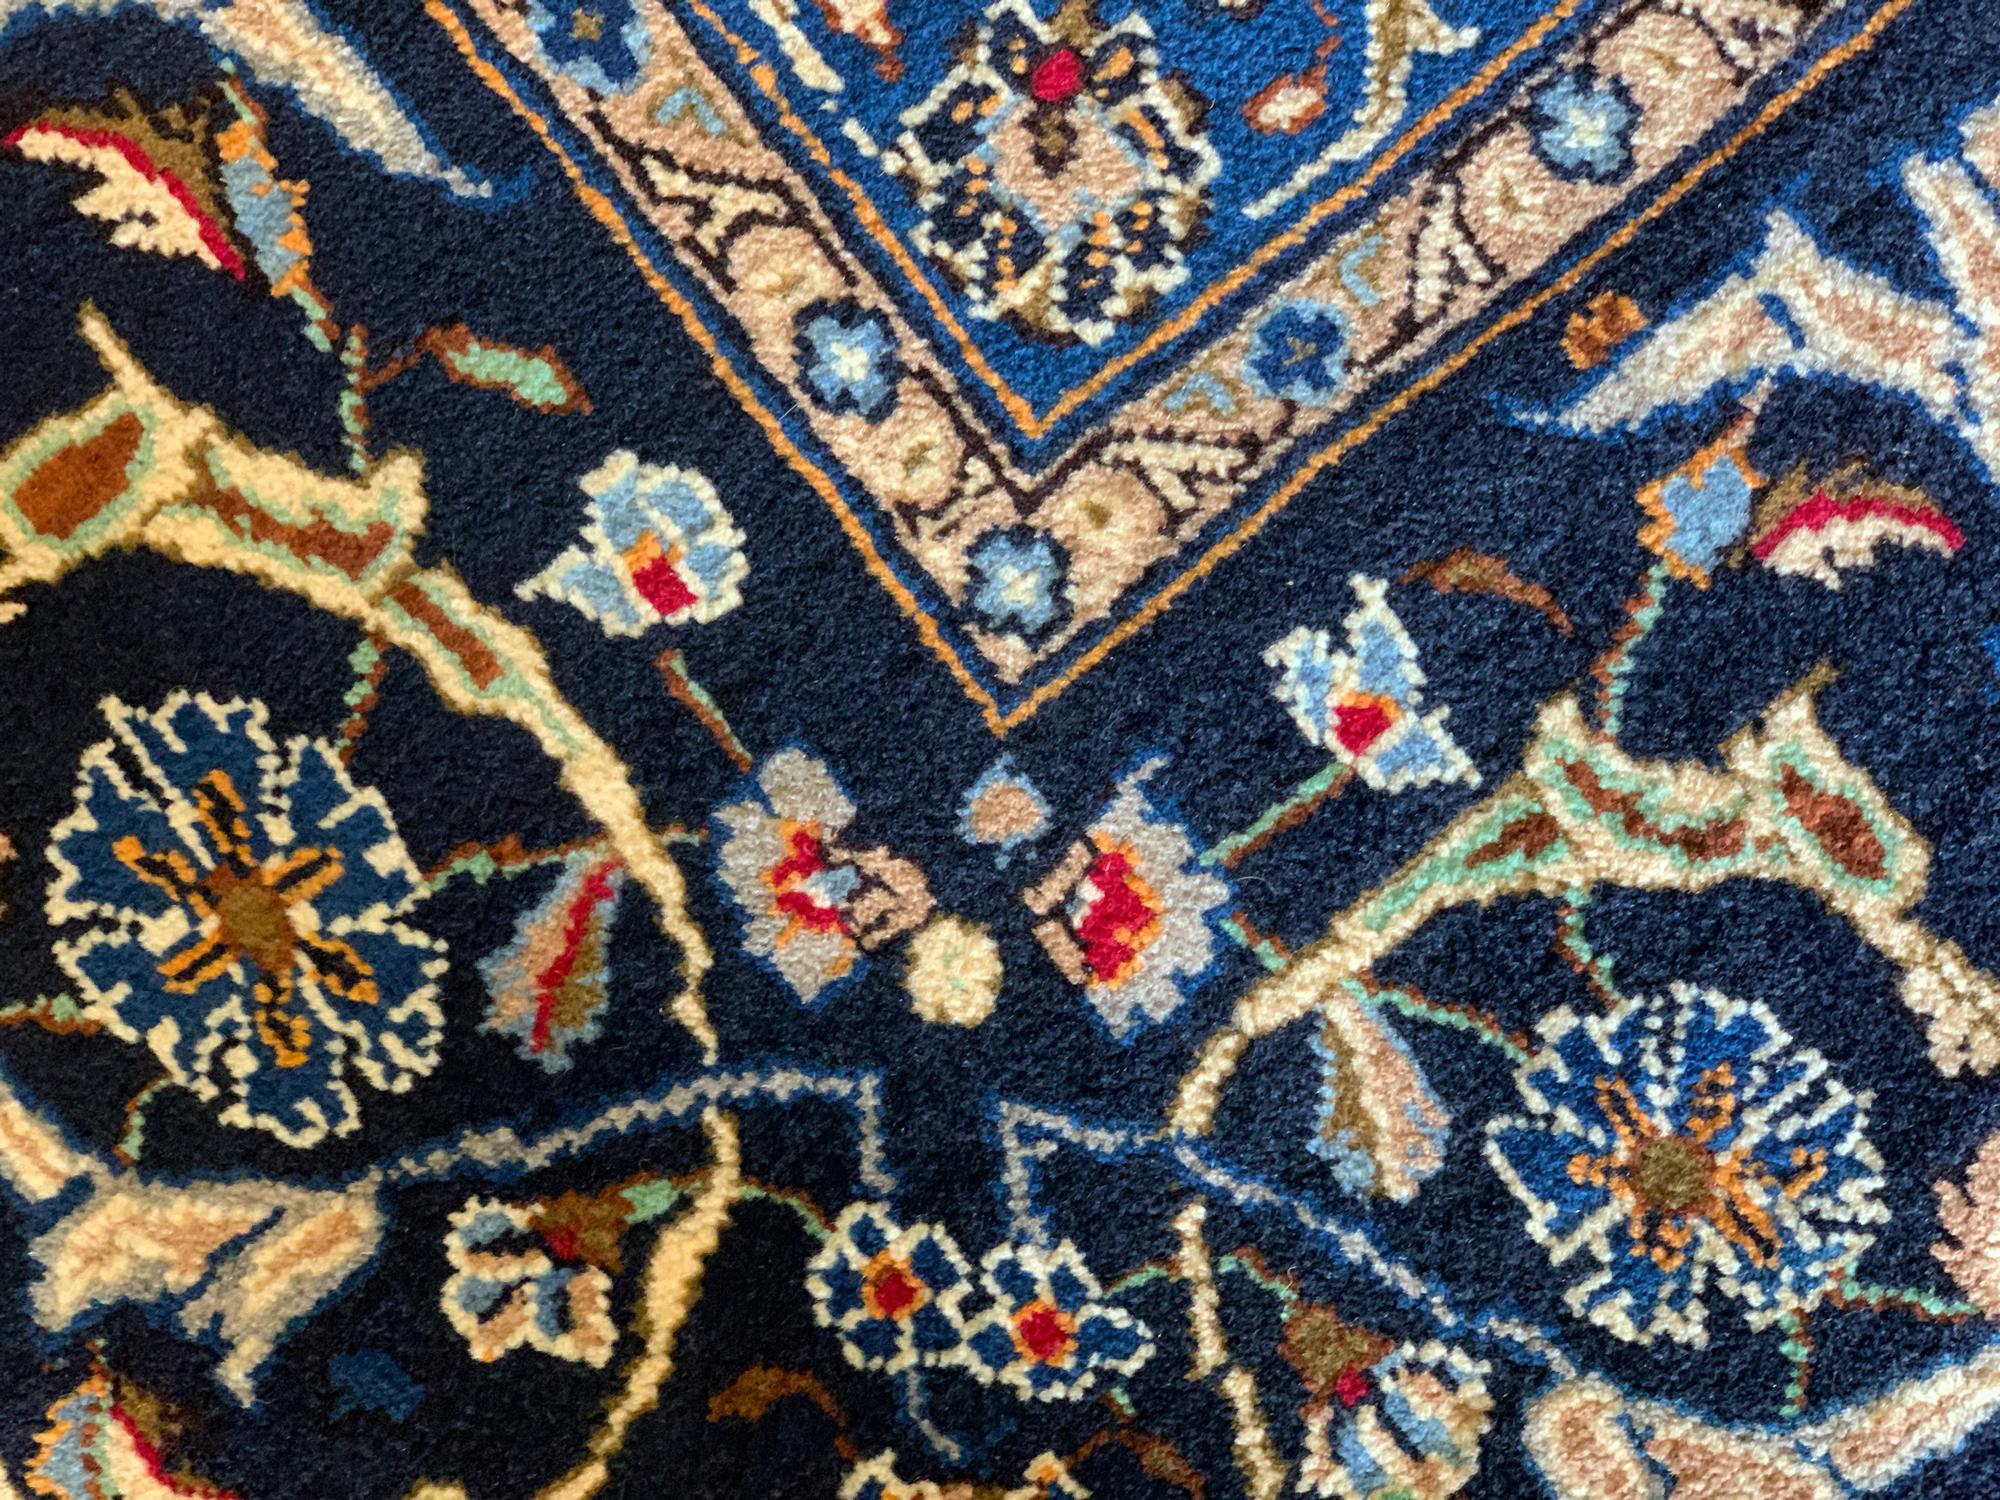 Large Oriental5 Carpet Rug Vintage Wool Blue Beige Rug In Excellent Condition For Sale In Hampshire, GB